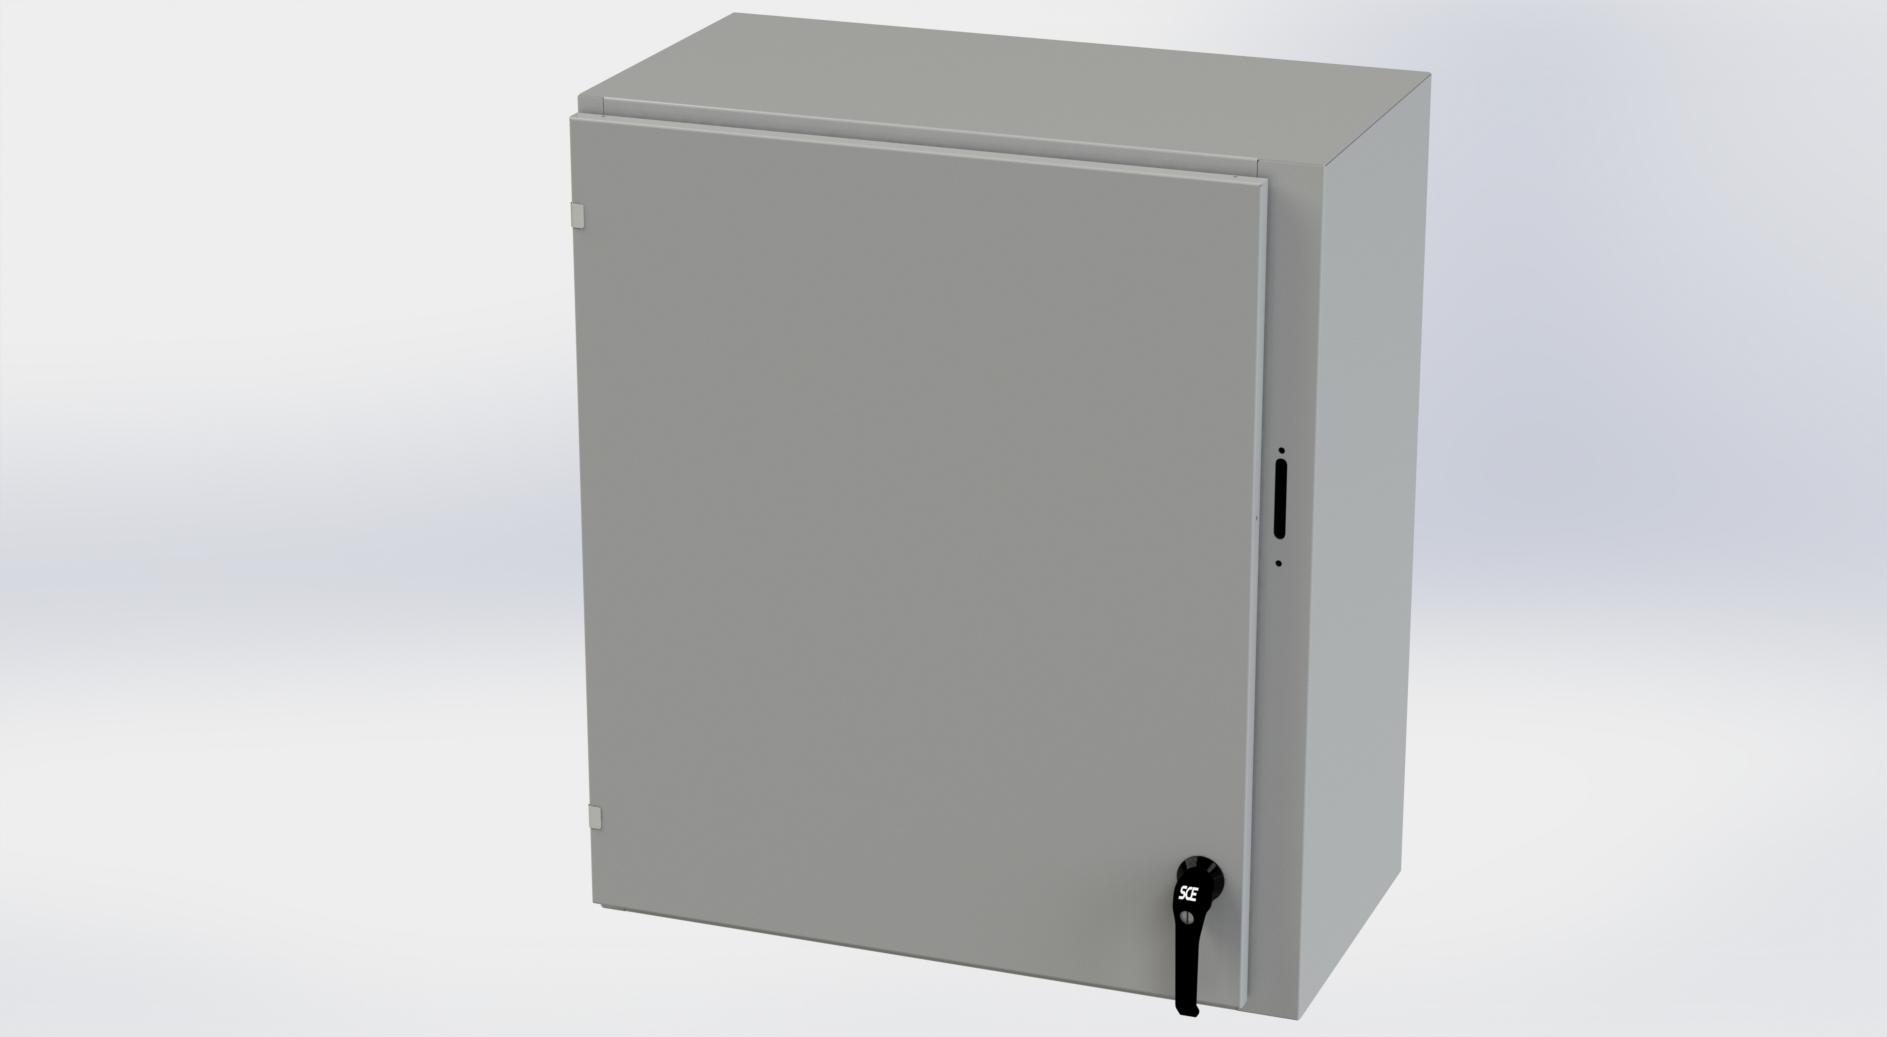 Saginaw Control SCE-36XEL3116LP XEL LP Enclosure, Height:36.00", Width:31.38", Depth:16.00", ANSI-61 gray powder coating inside and out. Optional sub-panels are powder coated white.